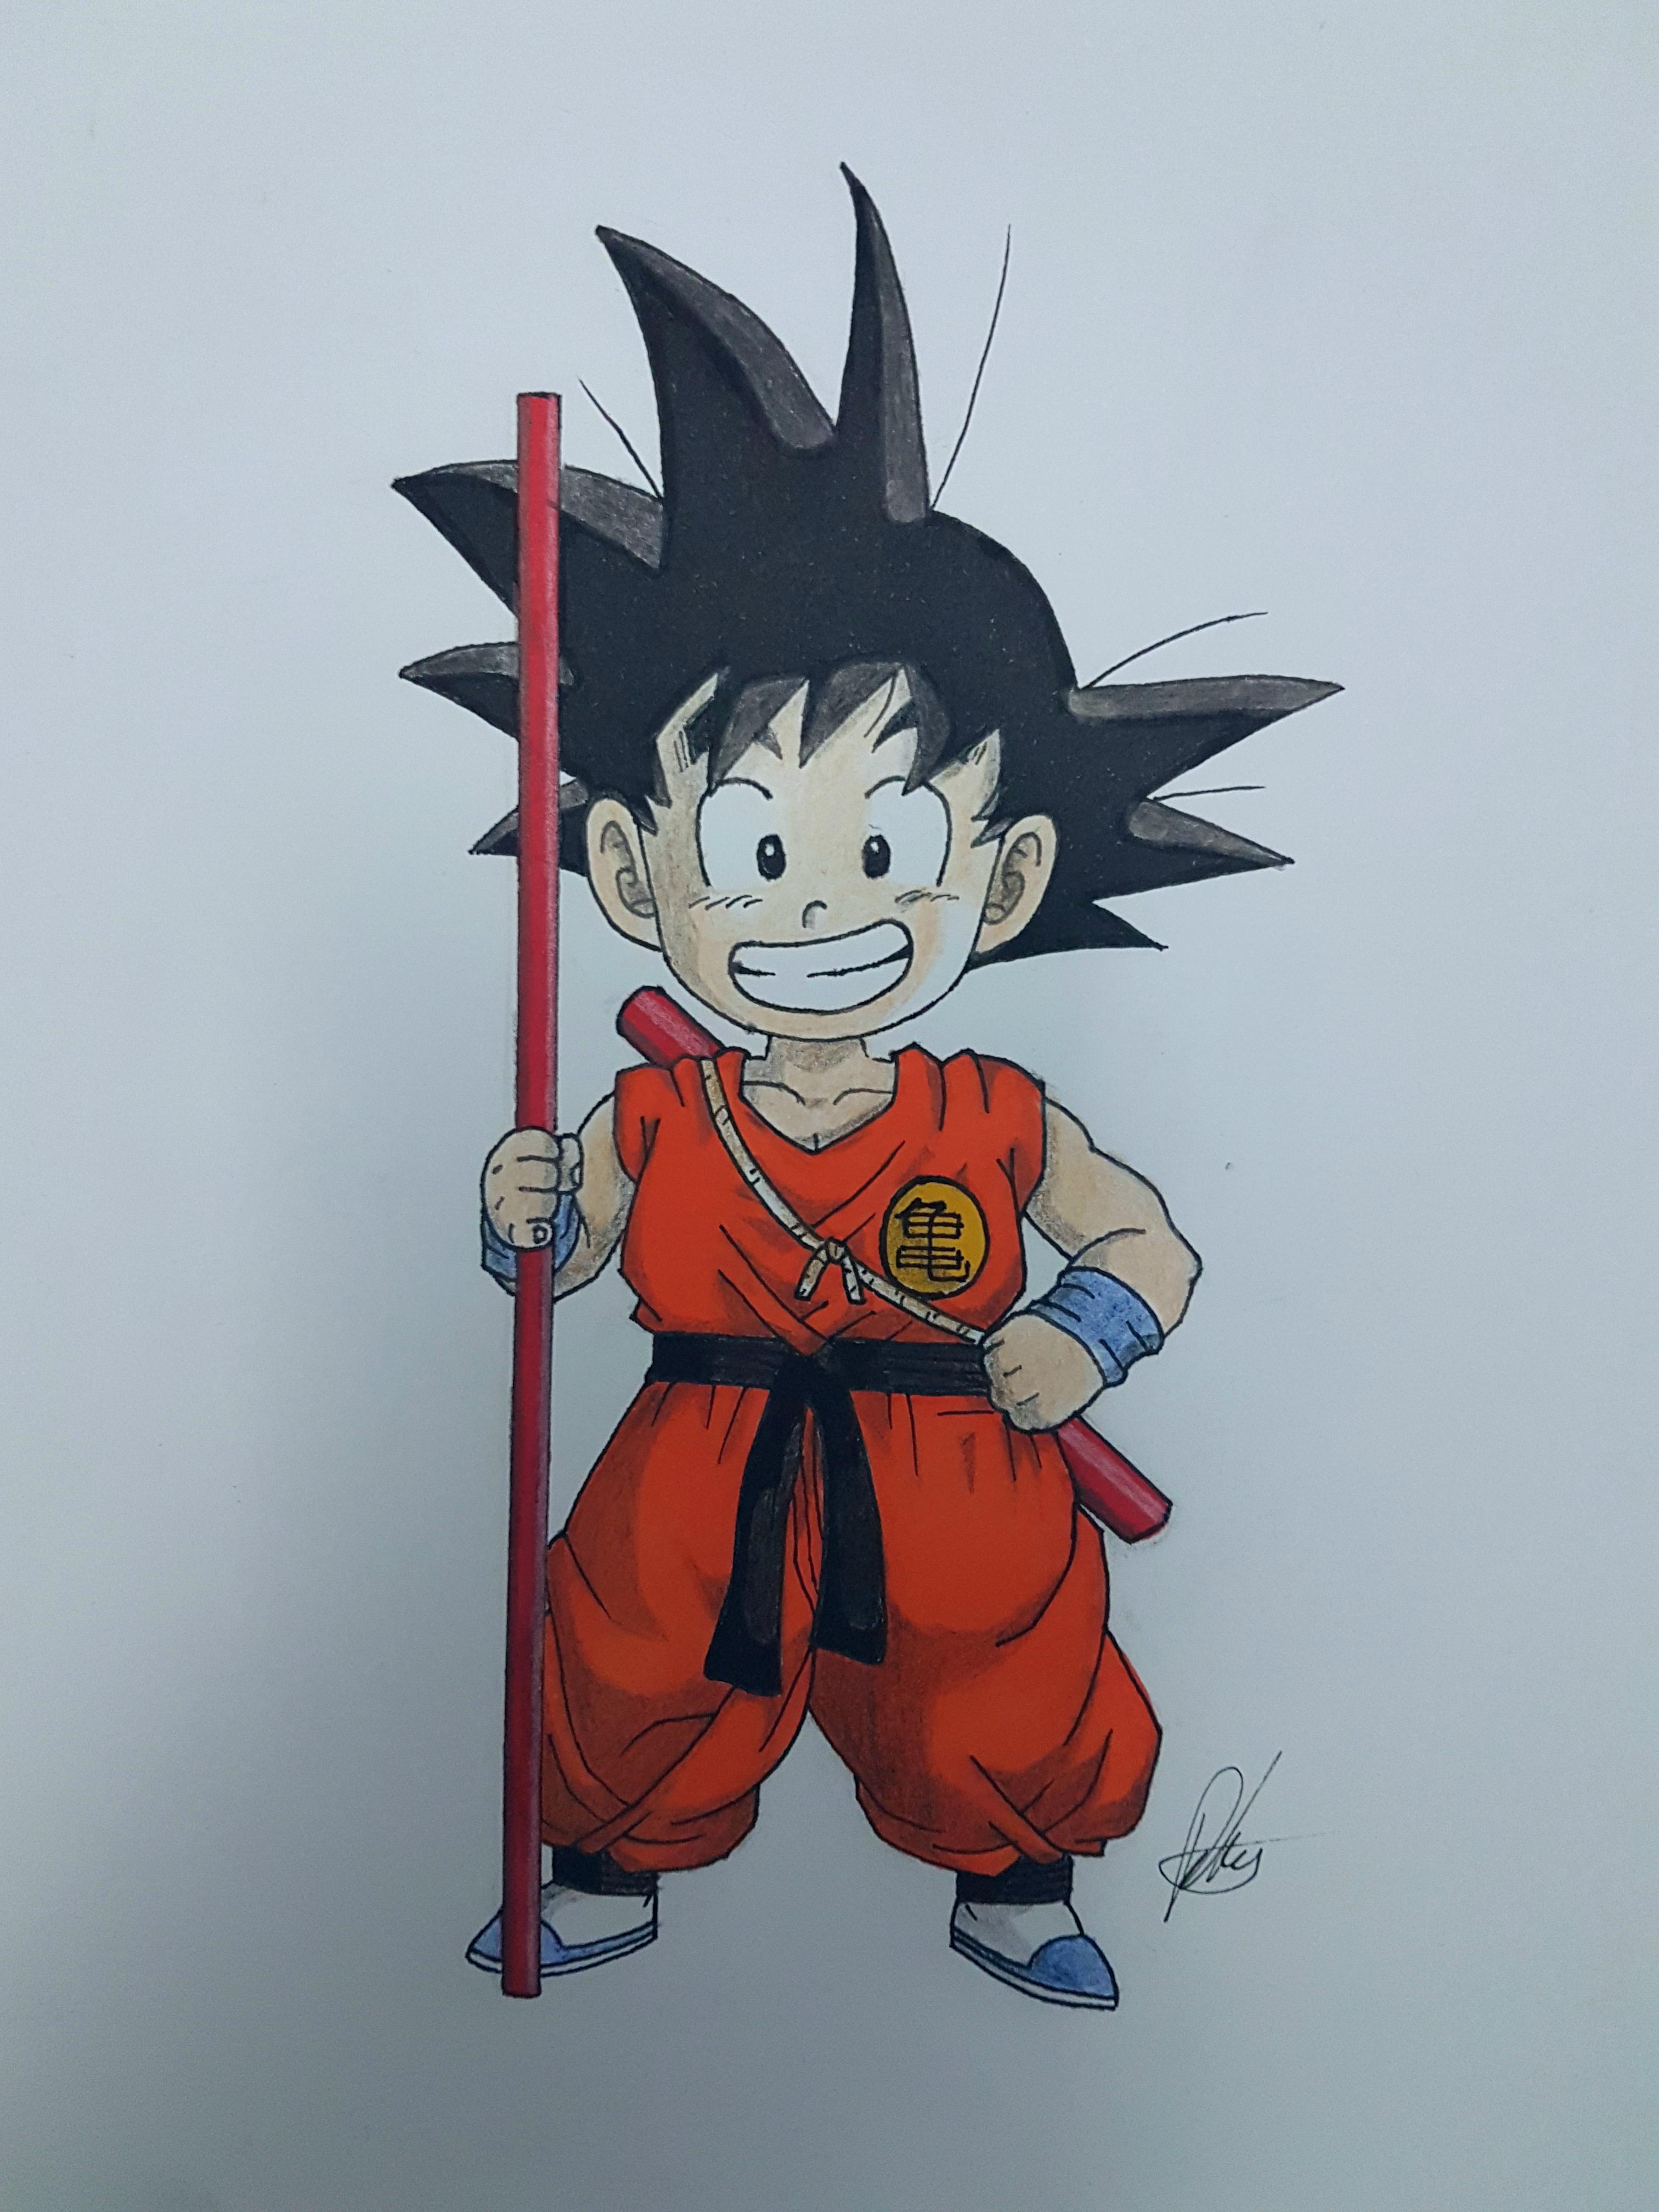 kl9ntzvbf1lz How to draw Goku in a few quick steps (Easy drawing tutorials)